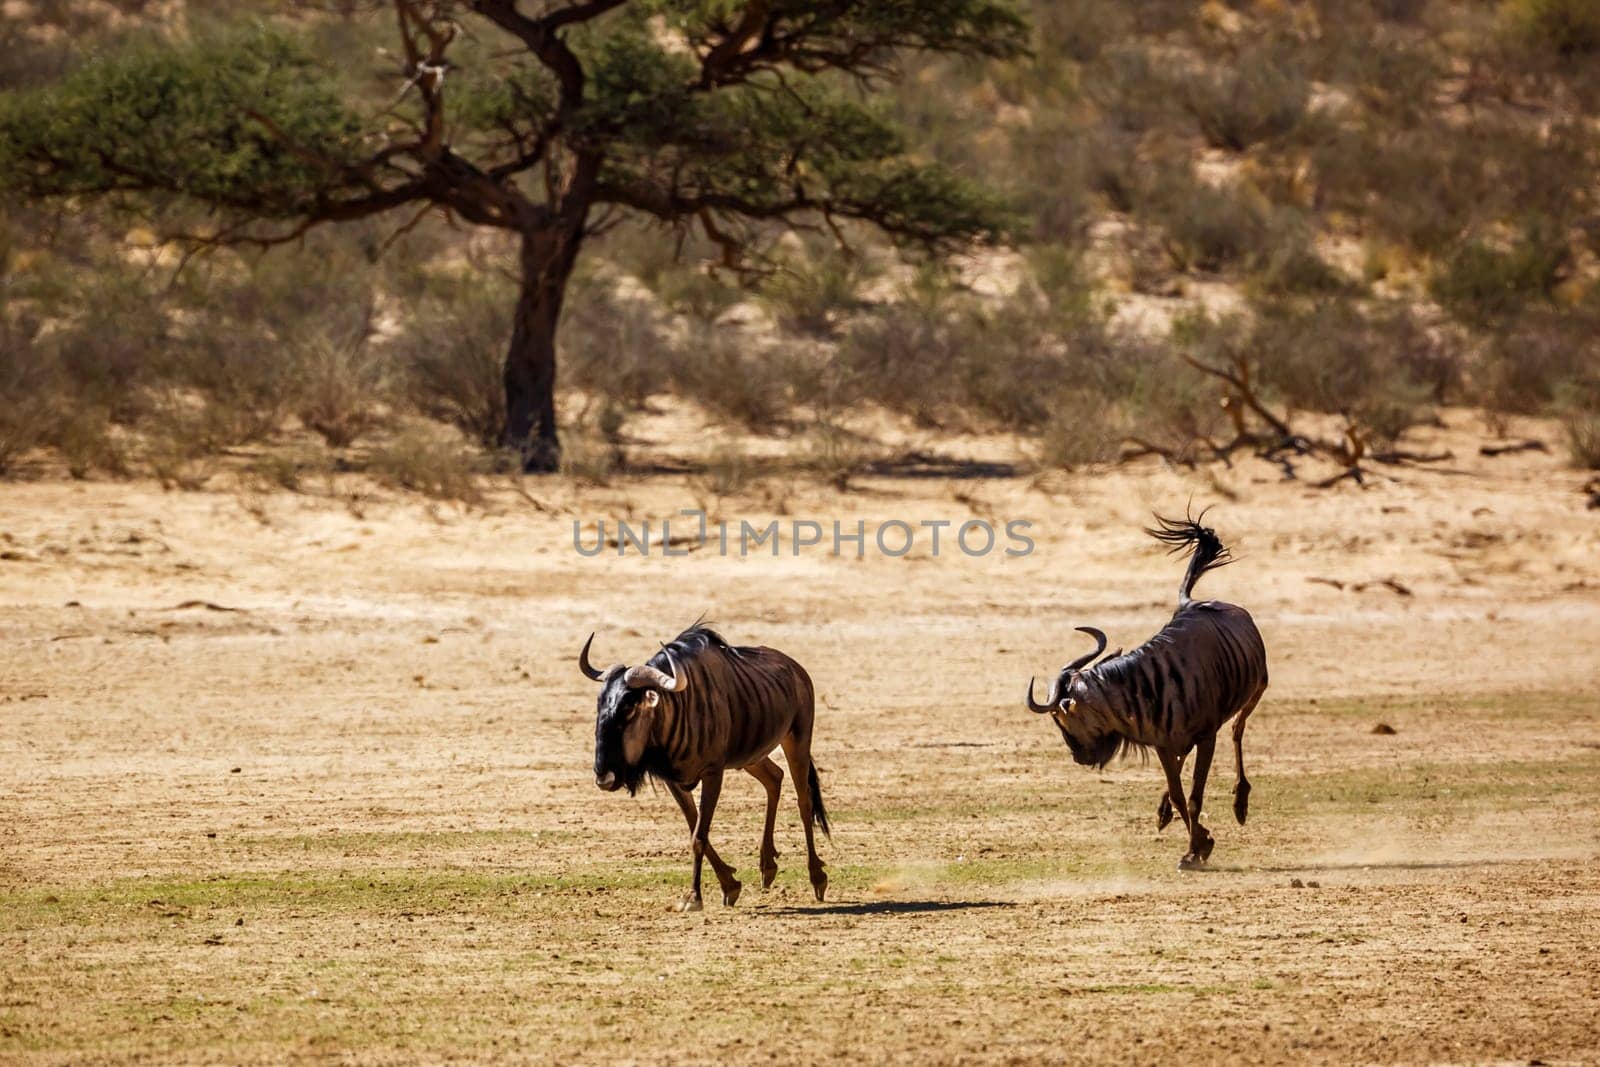 Two Blue wildebeest running out in dry land in Kgalagadi transfrontier park, South Africa ; Specie Connochaetes taurinus family of Bovidae